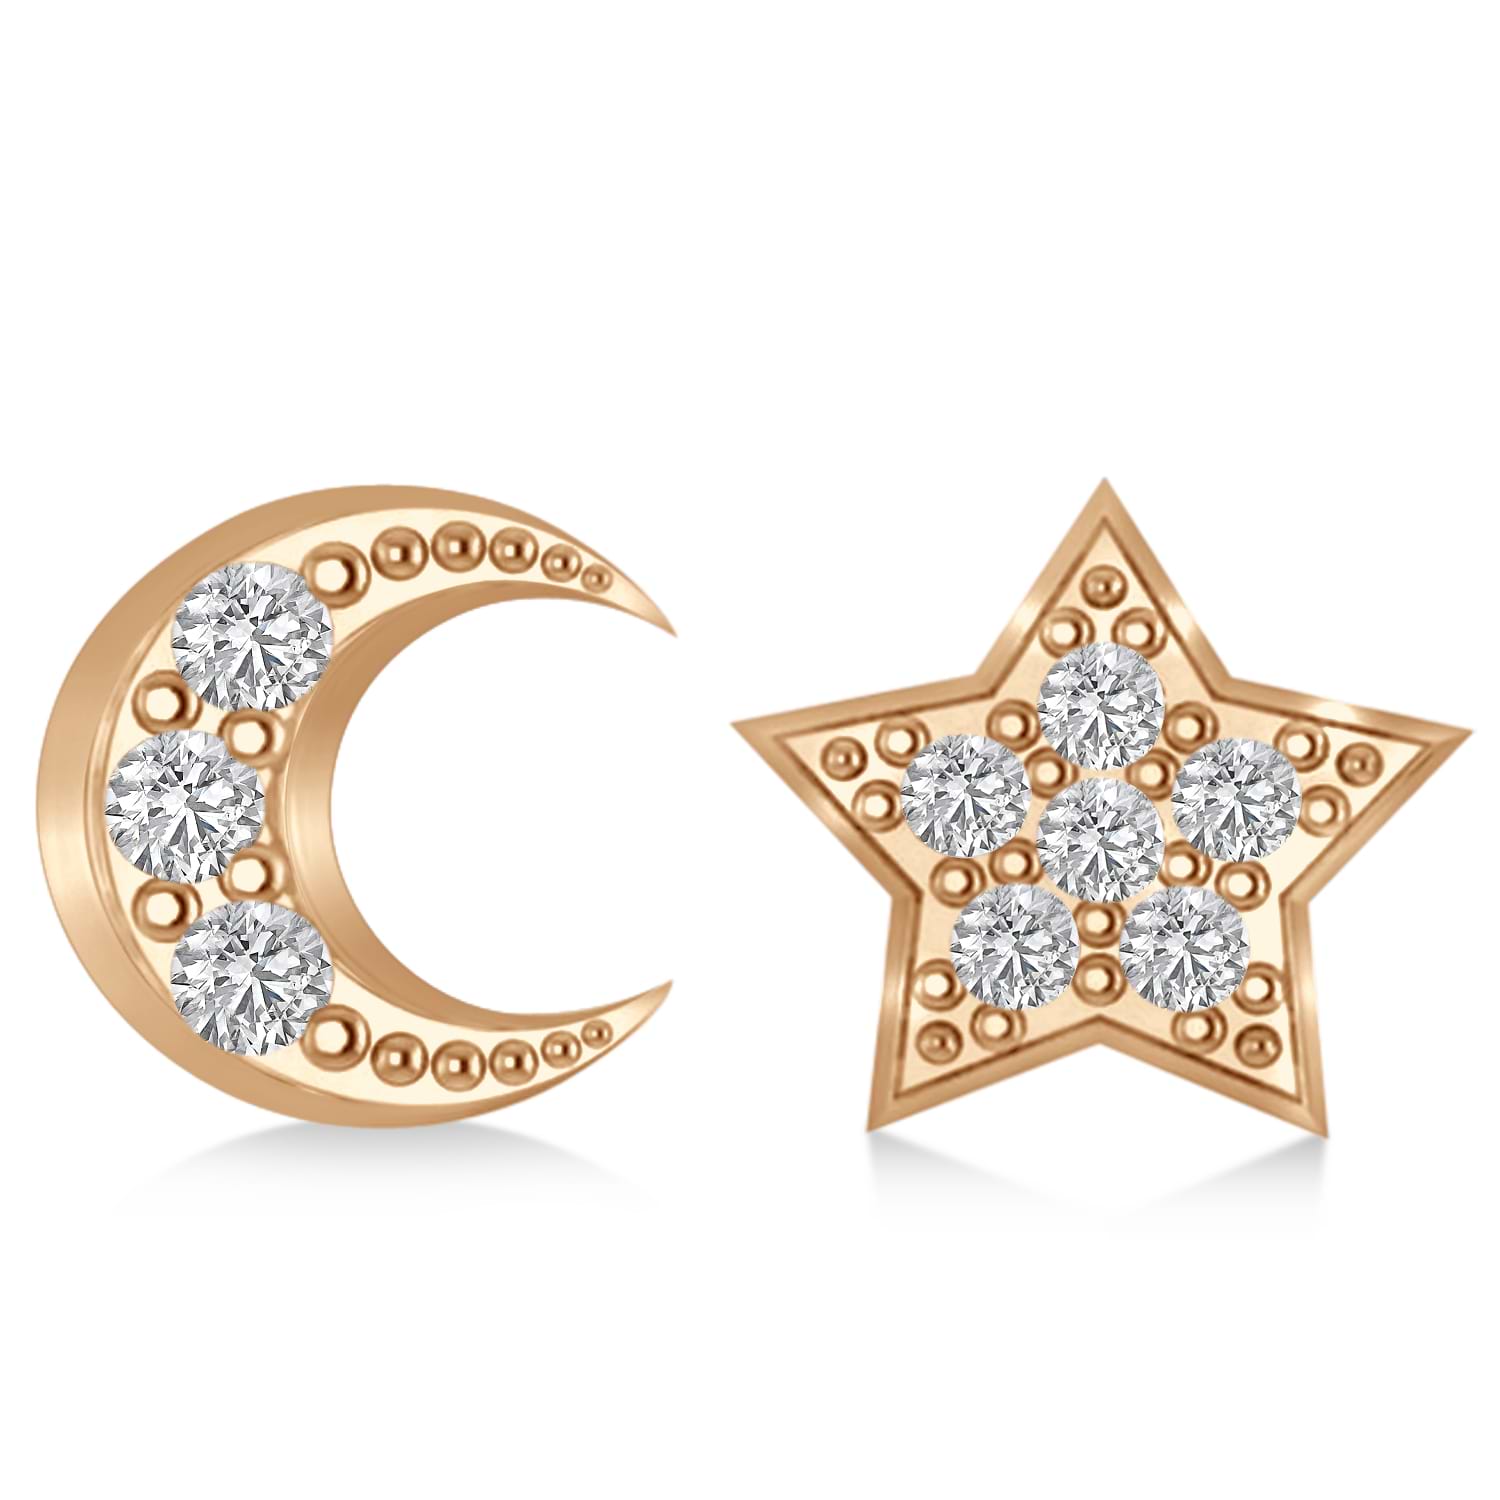 Moon & Star Diamond Mismatched Earrings 14k Rose Gold (0.14ct)